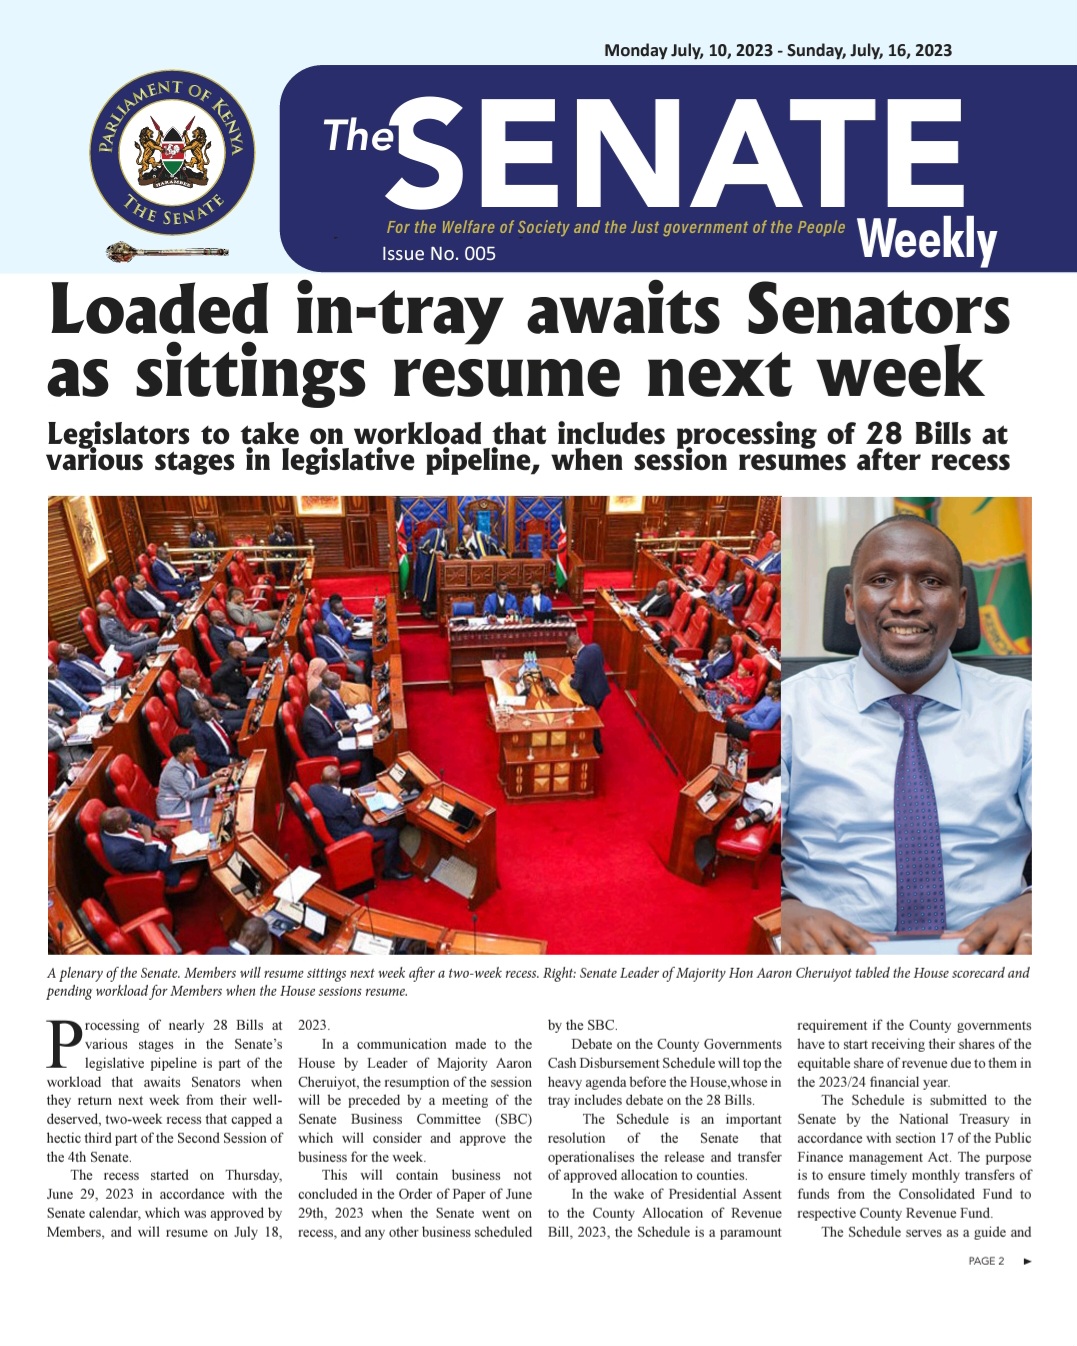 THE SENATE WEEKLY: Issue No.005